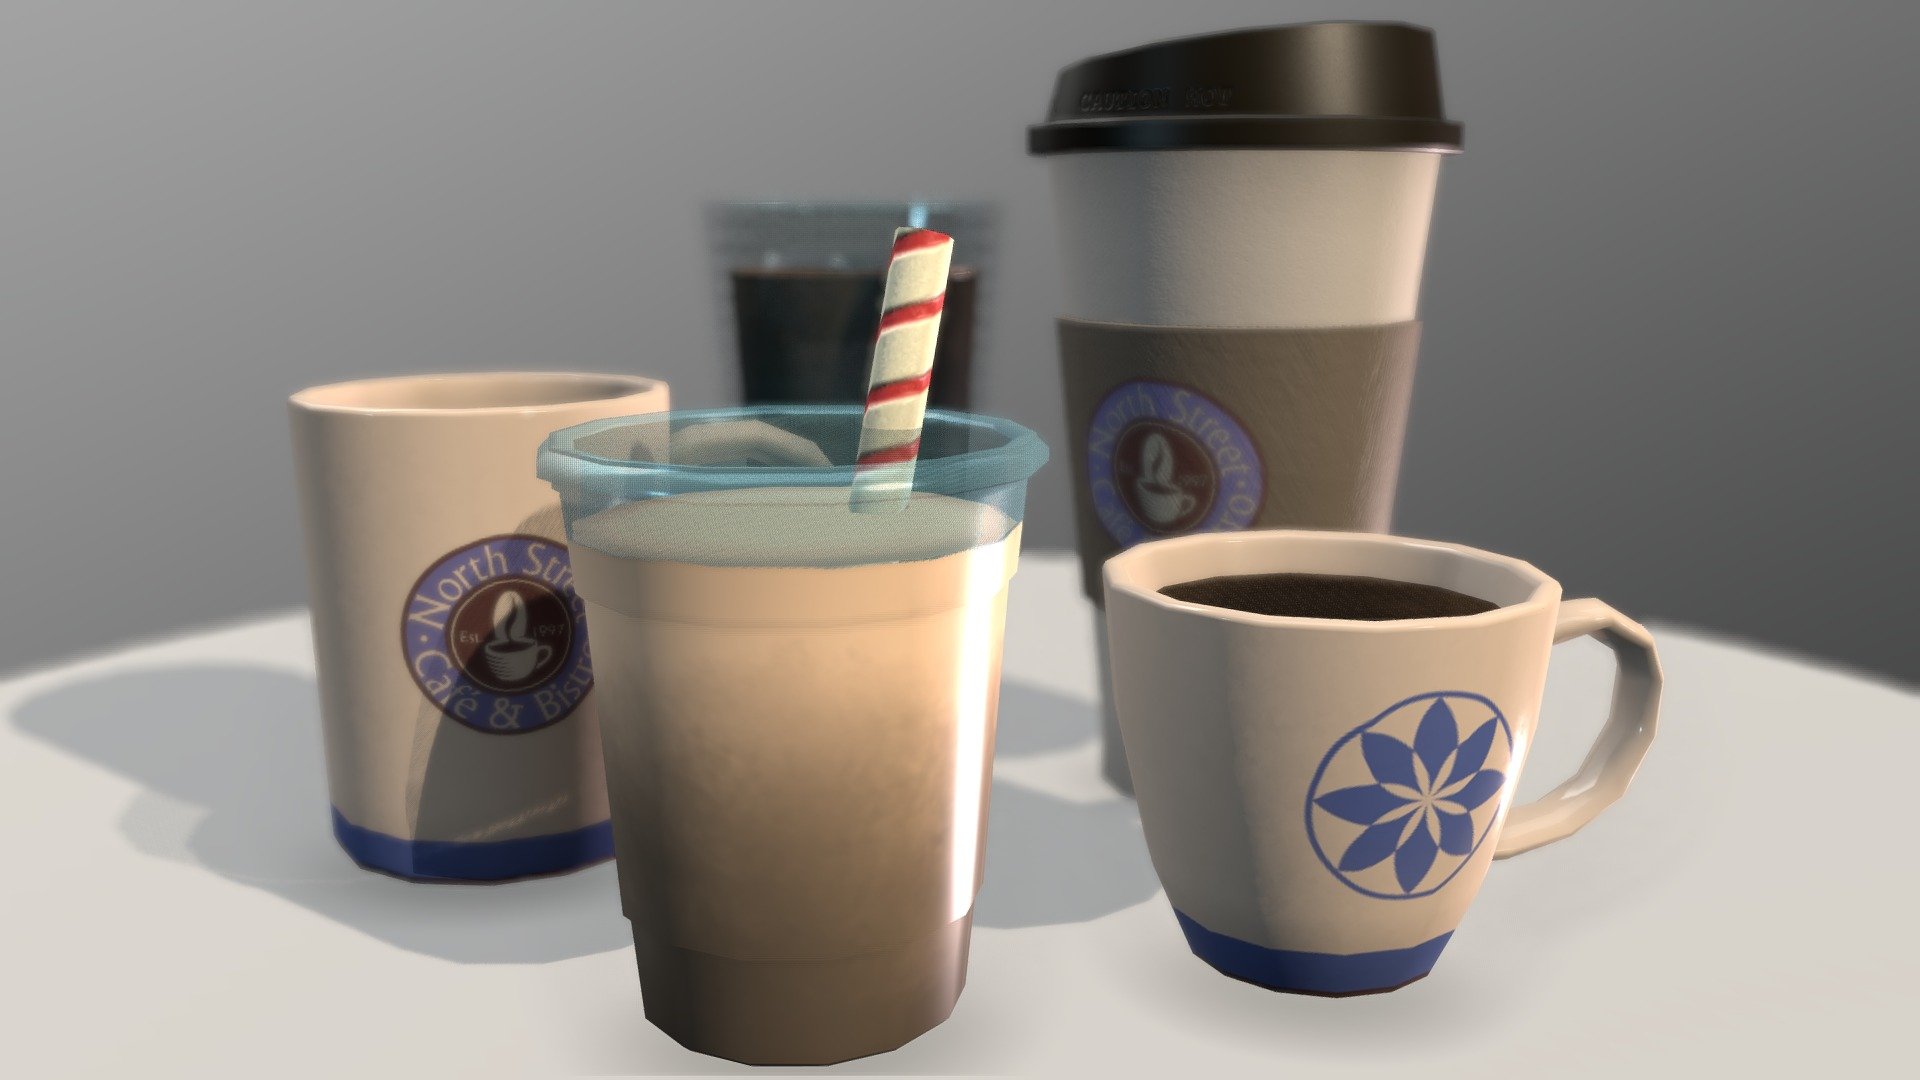 Coffee cup model pack including variations on the cups and drinks and swappable pieces. Features a disposable cup, plastic boba cup with frozen drink variation, glass cup, coffee mug, coffee cup, swappable textures, and a whipped swirl.

The North Street Coffee Co. branding is designed by myself and a royalty free generic coffee branding 3d model